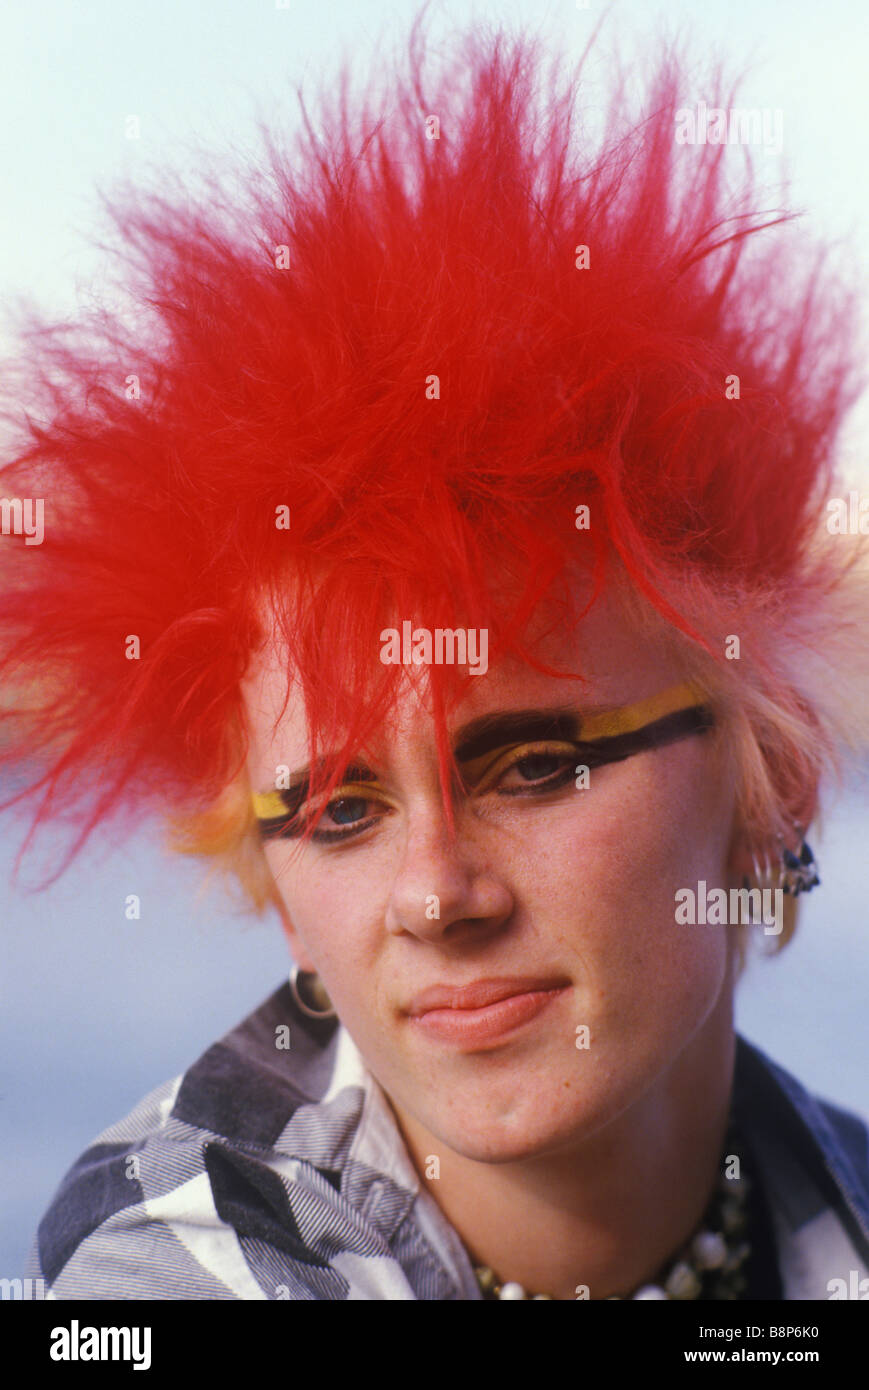 Punk 1980s Teen Boy With Bright Red Hair And Yellow And Black Eye Makeup Circa 1985 London Uk Homer Sykes Stock Photo Alamy